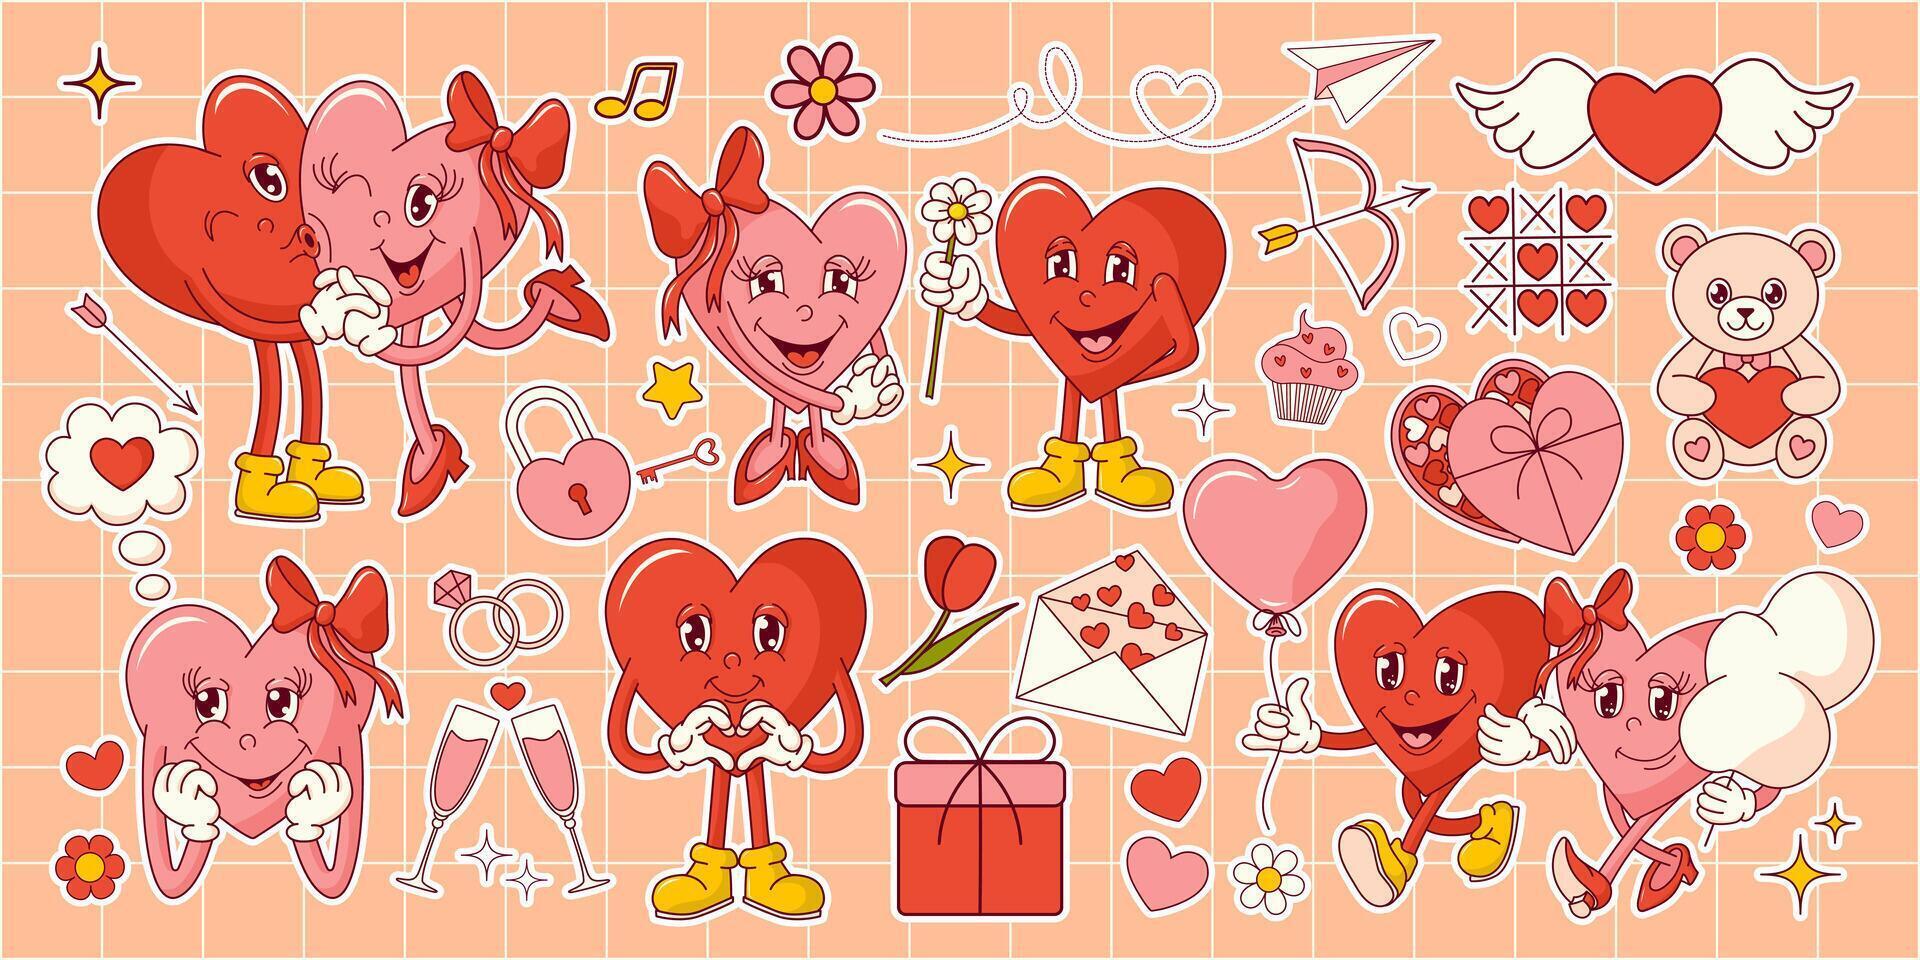 Groovy hearts character stickers set. Valentine's day. Retro vector illustration.